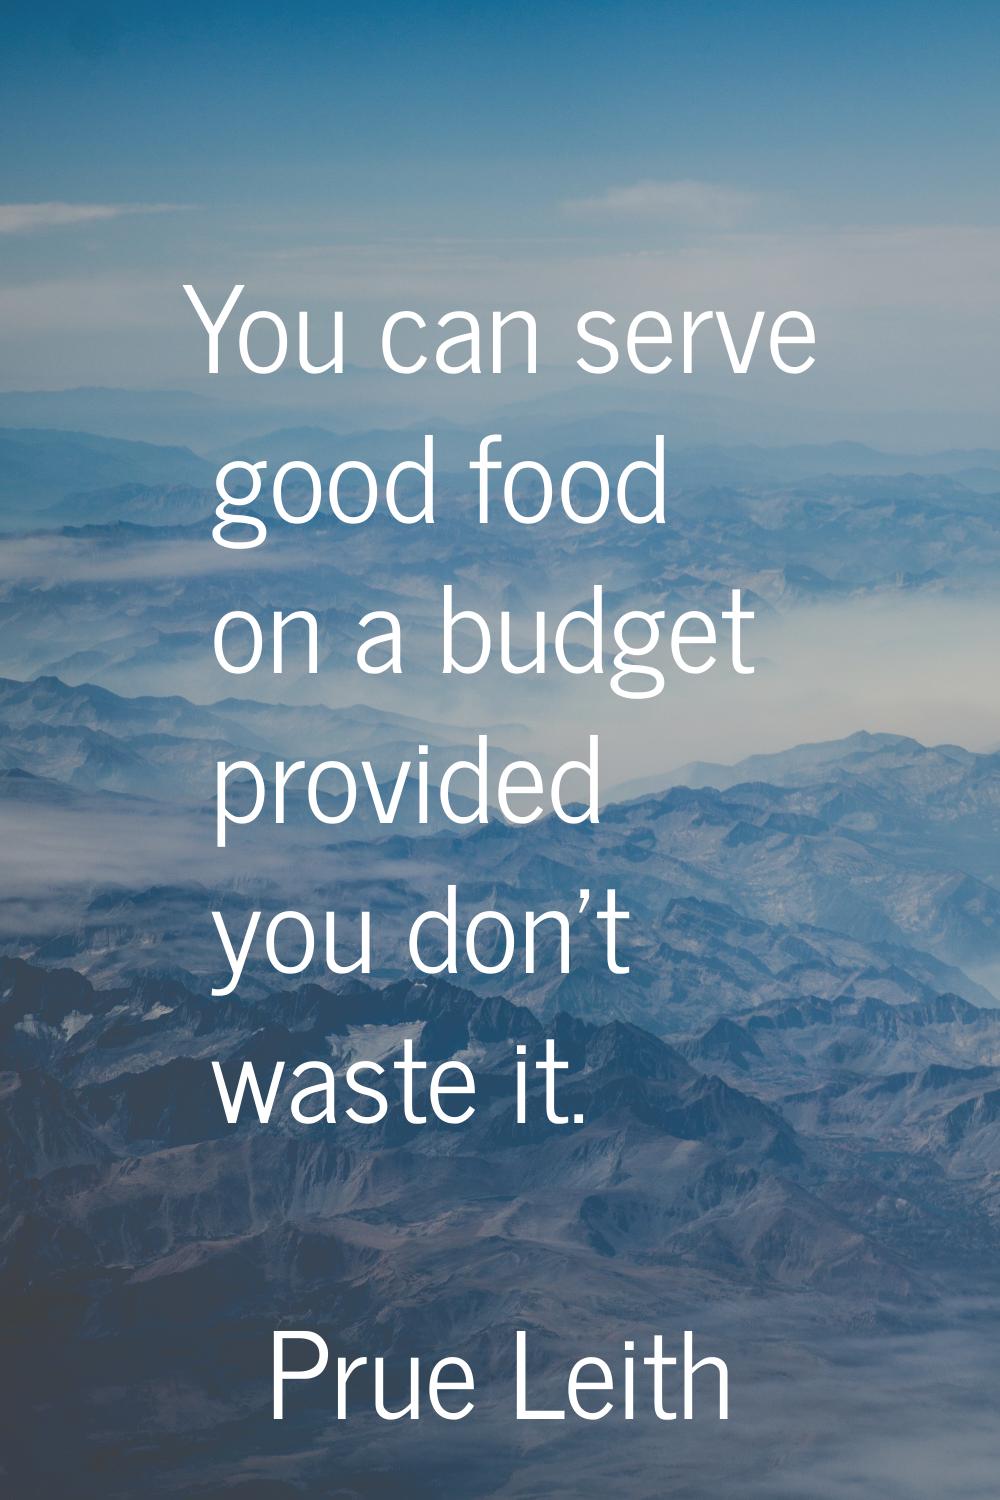 You can serve good food on a budget provided you don't waste it.